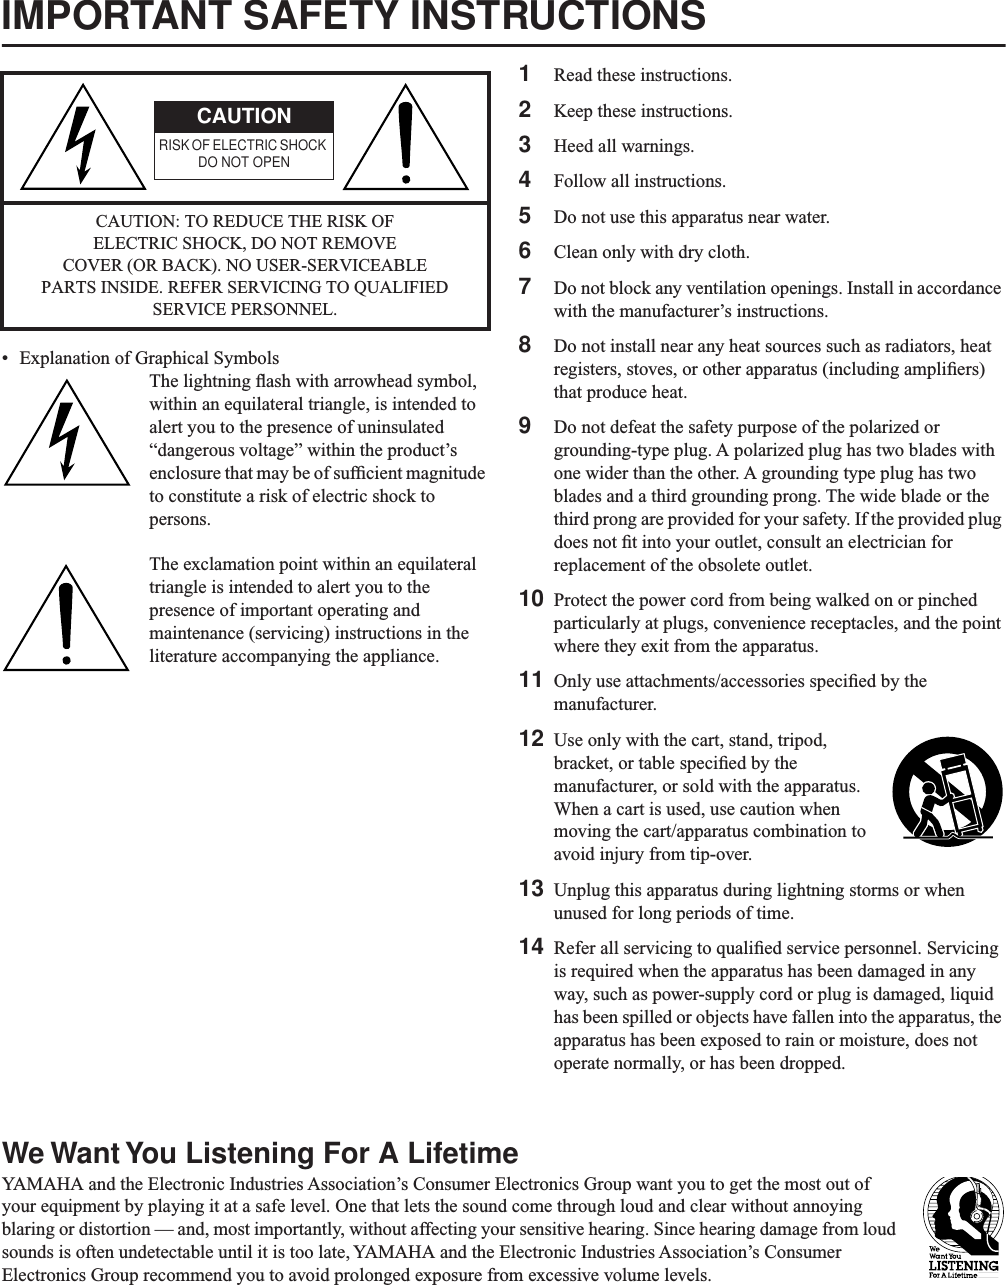 IMPORTANT SAFETY INSTRUCTIONS• Explanation of Graphical SymbolsThe lightning ﬂash with arrowhead symbol, within an equilateral triangle, is intended to alert you to the presence of uninsulated “dangerous voltage” within the product’s enclosure that may be of sufﬁcient magnitude to constitute a risk of electric shock to persons.The exclamation point within an equilateral triangle is intended to alert you to the presence of important operating and maintenance (servicing) instructions in the literature accompanying the appliance.1Read these instructions.2Keep these instructions.3Heed all warnings.4Follow all instructions.5Do not use this apparatus near water.6Clean only with dry cloth.7Do not block any ventilation openings. Install in accordance with the manufacturer’s instructions.8Do not install near any heat sources such as radiators, heat registers, stoves, or other apparatus (including ampliﬁers) that produce heat.9Do not defeat the safety purpose of the polarized or grounding-type plug. A polarized plug has two blades with one wider than the other. A grounding type plug has two blades and a third grounding prong. The wide blade or the third prong are provided for your safety. If the provided plug does not ﬁt into your outlet, consult an electrician for replacement of the obsolete outlet.10 Protect the power cord from being walked on or pinched particularly at plugs, convenience receptacles, and the point where they exit from the apparatus.11 Only use attachments/accessories speciﬁed by the manufacturer.12 Use only with the cart, stand, tripod, bracket, or table speciﬁed by the manufacturer, or sold with the apparatus. When a cart is used, use caution when moving the cart/apparatus combination to avoid injury from tip-over.13 Unplug this apparatus during lightning storms or when unused for long periods of time.14 Refer all servicing to qualiﬁed service personnel. Servicing is required when the apparatus has been damaged in any way, such as power-supply cord or plug is damaged, liquid has been spilled or objects have fallen into the apparatus, the apparatus has been exposed to rain or moisture, does not operate normally, or has been dropped.We Want You Listening For A LifetimeYAMAHA and the Electronic Industries Association’s Consumer Electronics Group want you to get the most out of your equipment by playing it at a safe level. One that lets the sound come through loud and clear without annoying blaring or distortion — and, most importantly, without affecting your sensitive hearing. Since hearing damage from loud sounds is often undetectable until it is too late, YAMAHA and the Electronic Industries Association’s Consumer Electronics Group recommend you to avoid prolonged exposure from excessive volume levels.CAUTION: TO REDUCE THE RISK OF ELECTRIC SHOCK, DO NOT REMOVE COVER (OR BACK). NO USER-SERVICEABLE PARTS INSIDE. REFER SERVICING TO QUALIFIED SERVICE PERSONNEL.CAUTIONRISK OF ELECTRIC SHOCK DO NOT OPEN